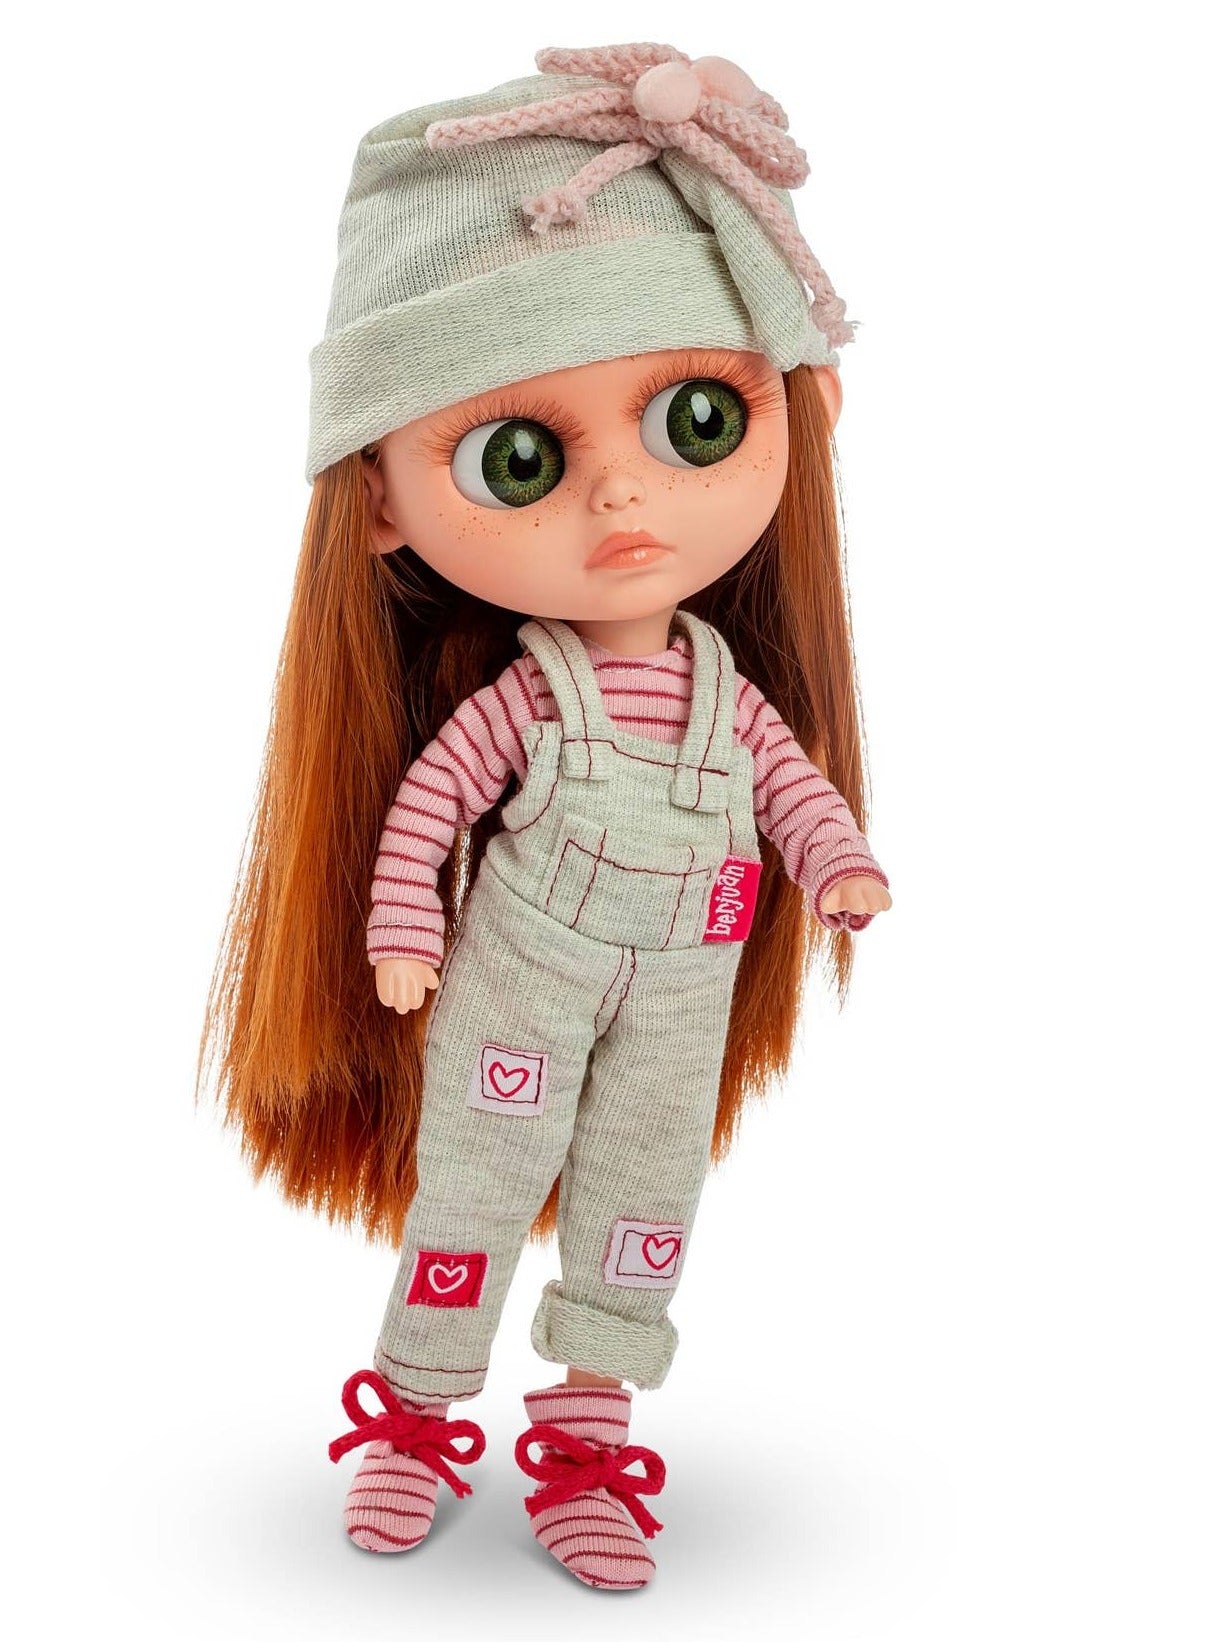 Sails Blunn- The Biggers Collection Doll